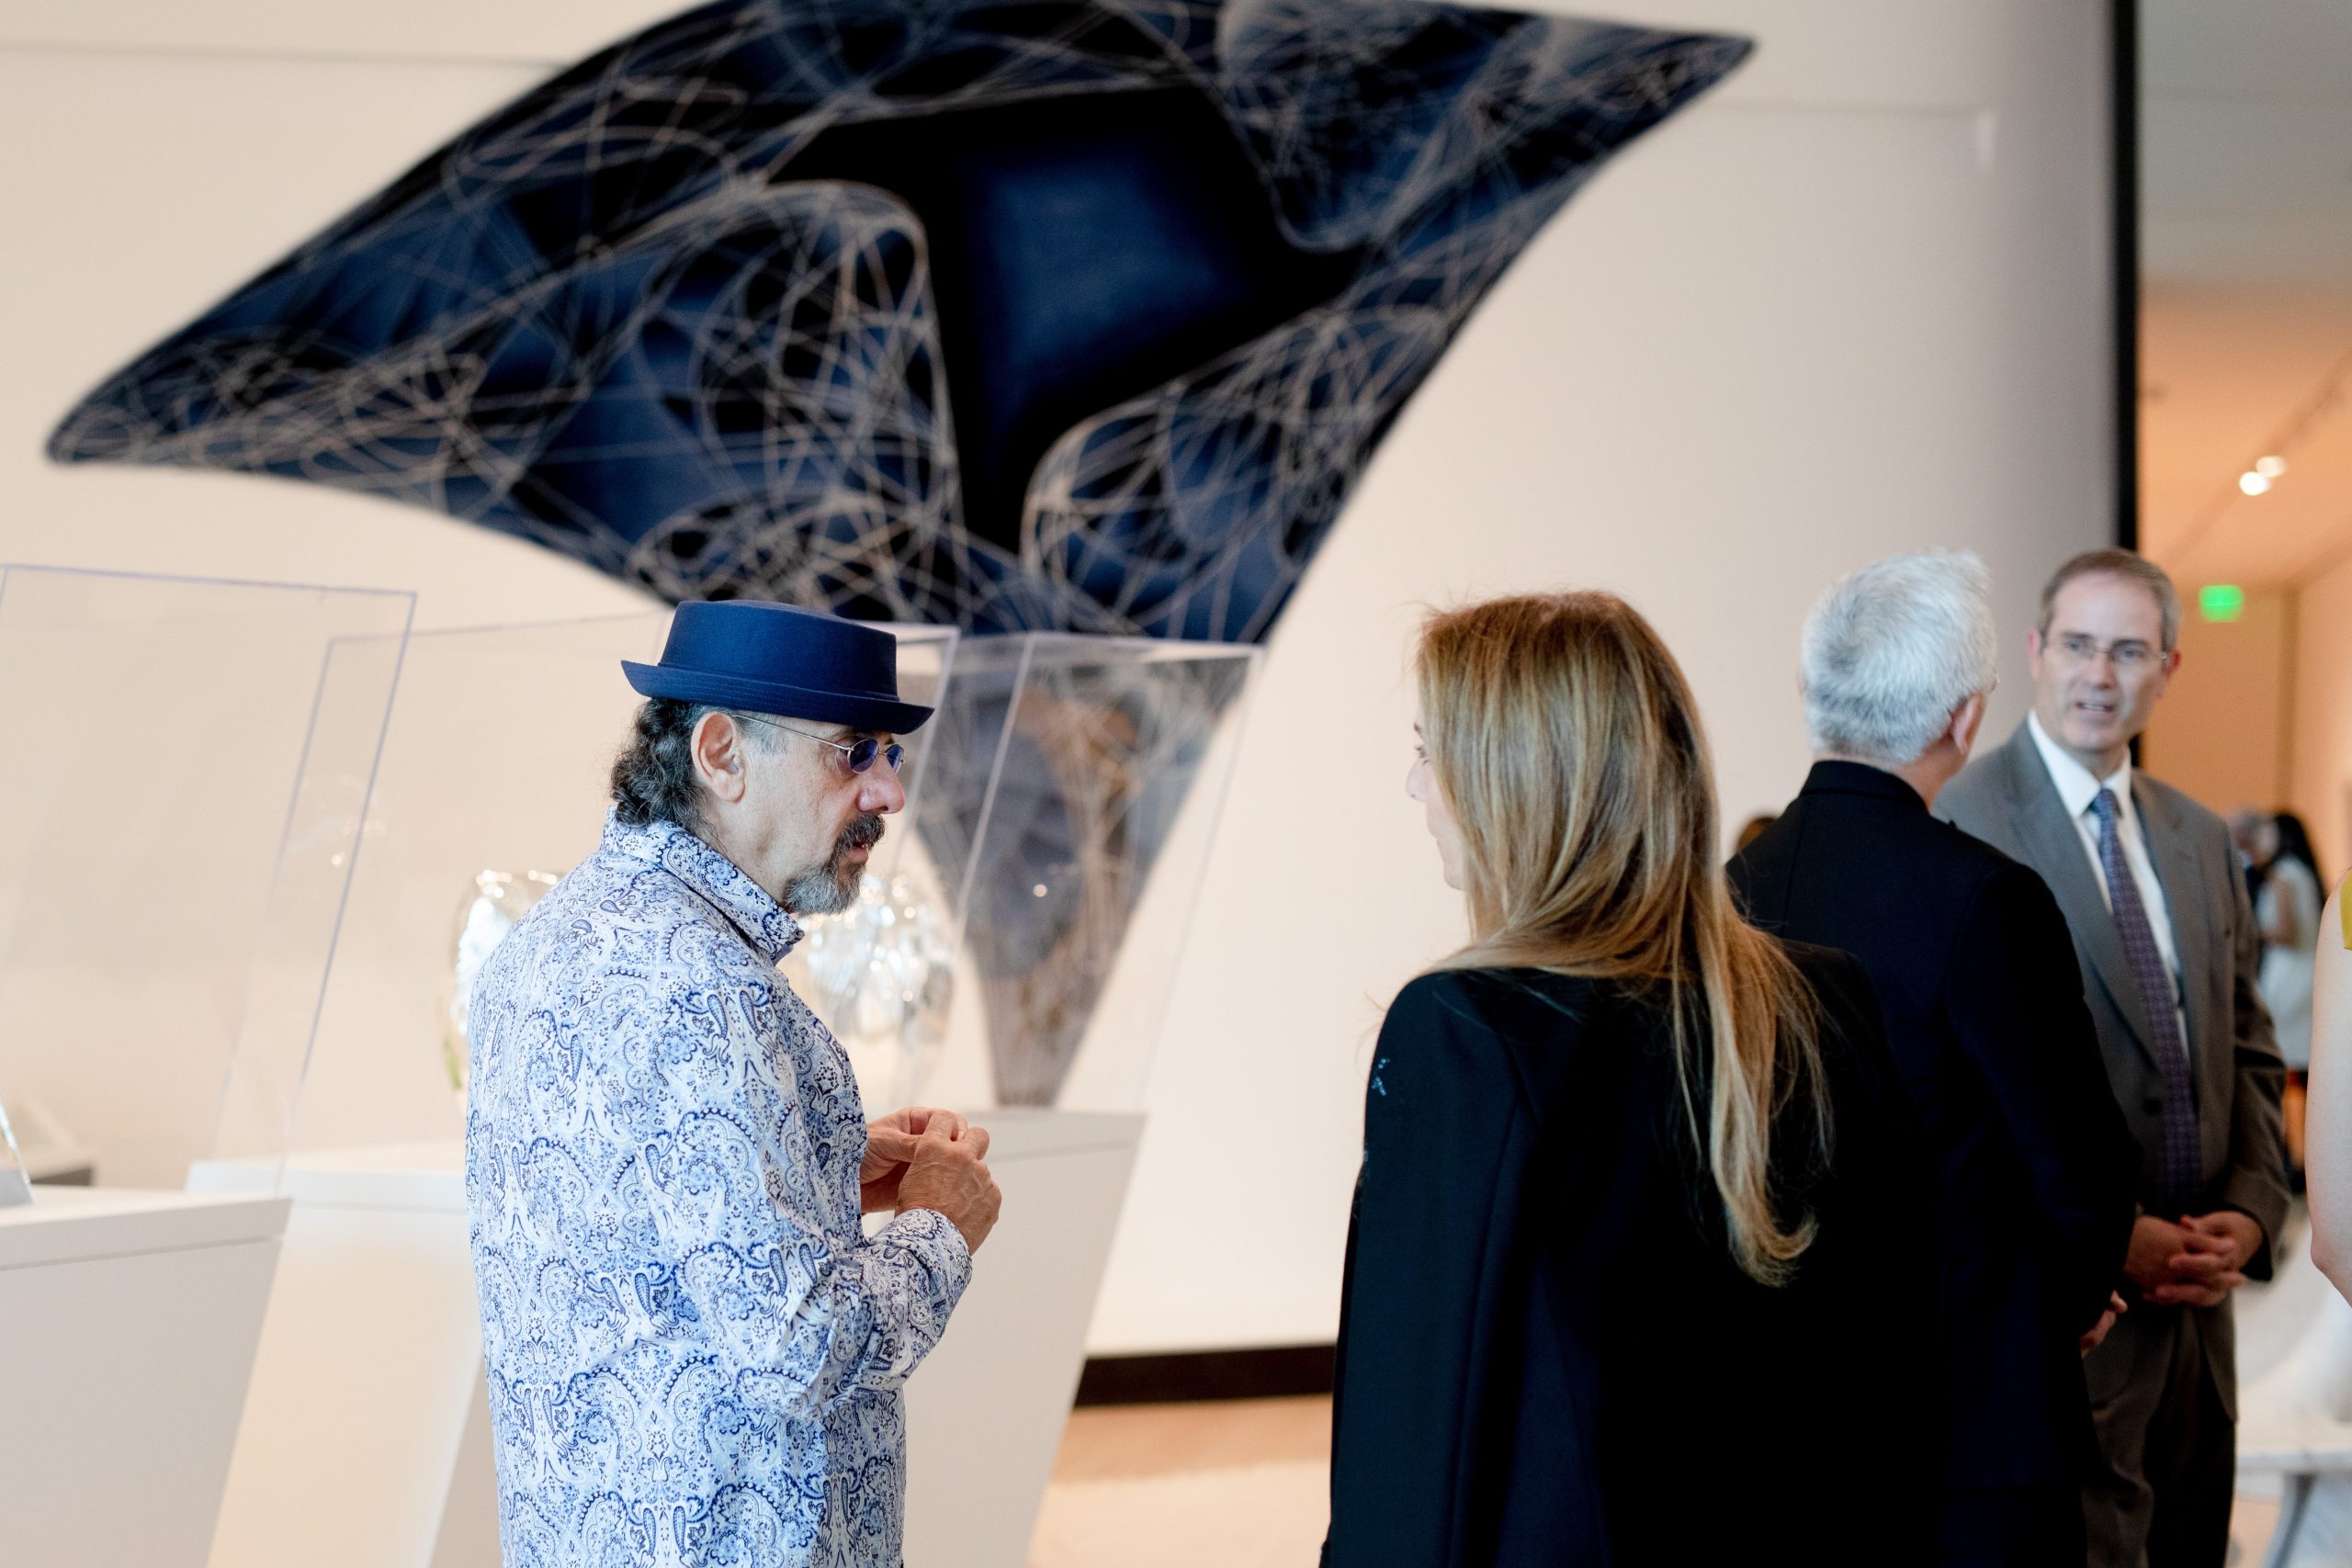 Visitors at the MSU Broad Art Museum talk about the Zaha Hadid Design: Untold exhibition together.